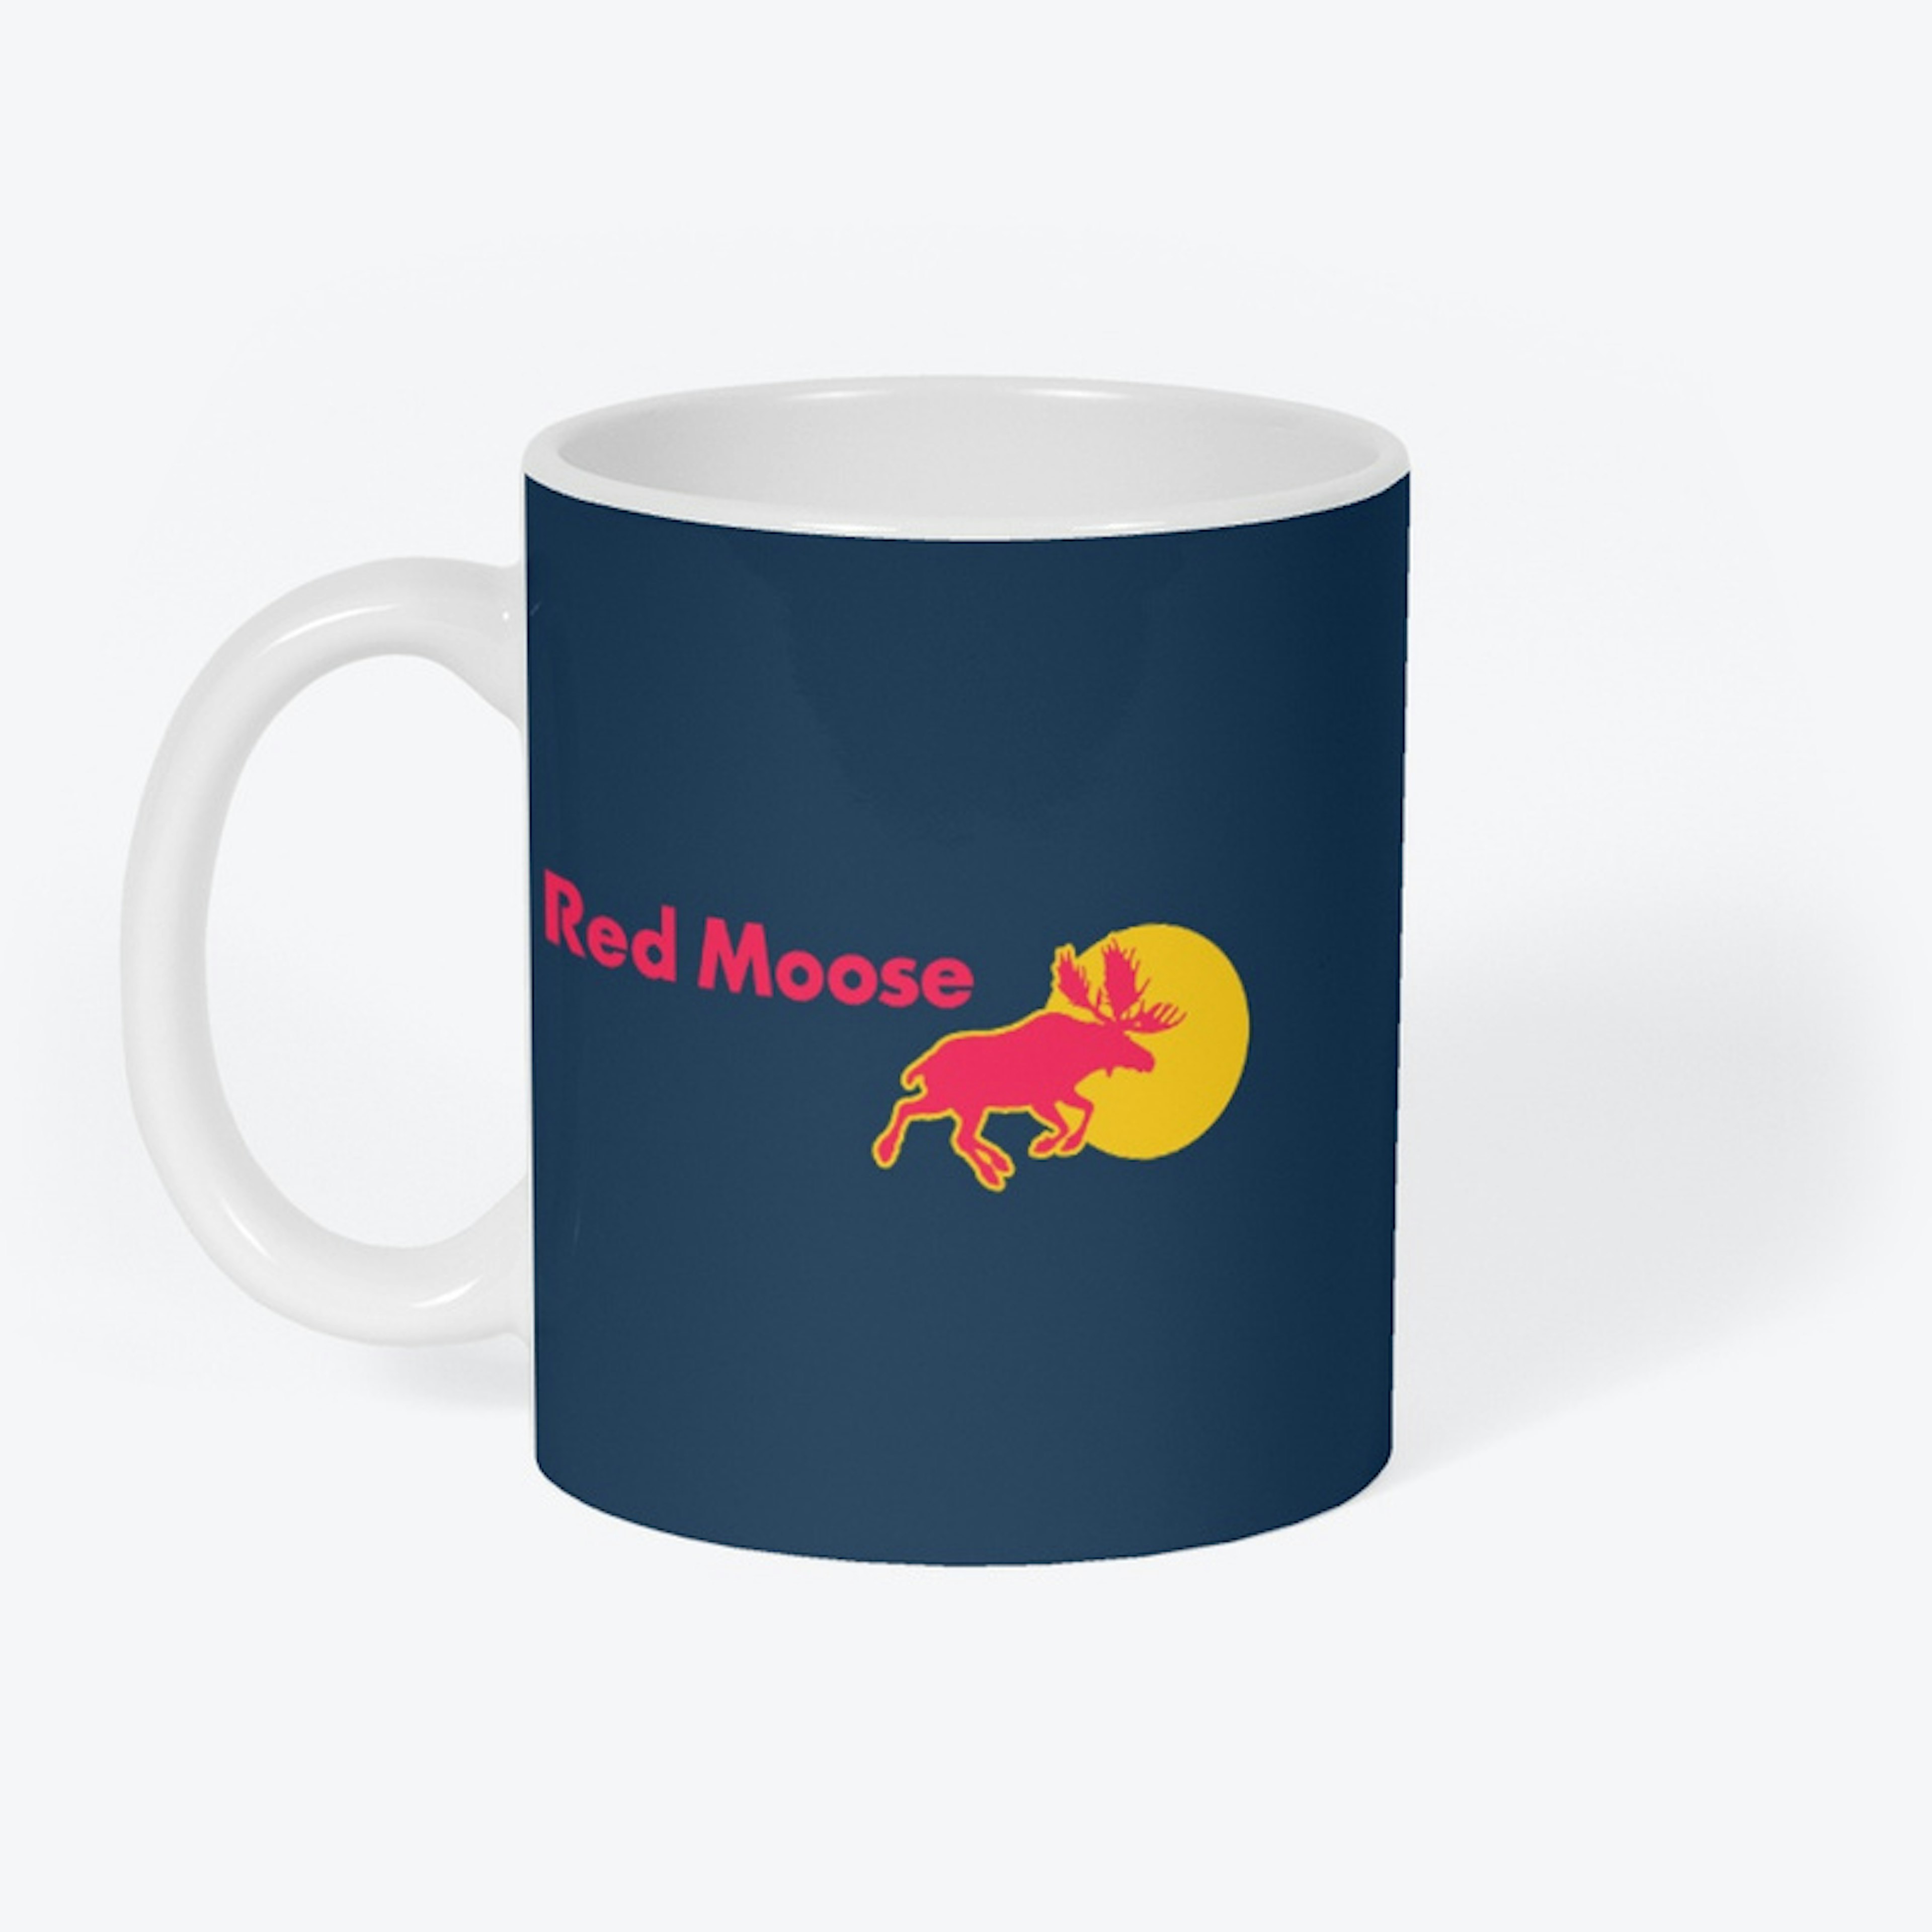 Support your Favorite Moose Team